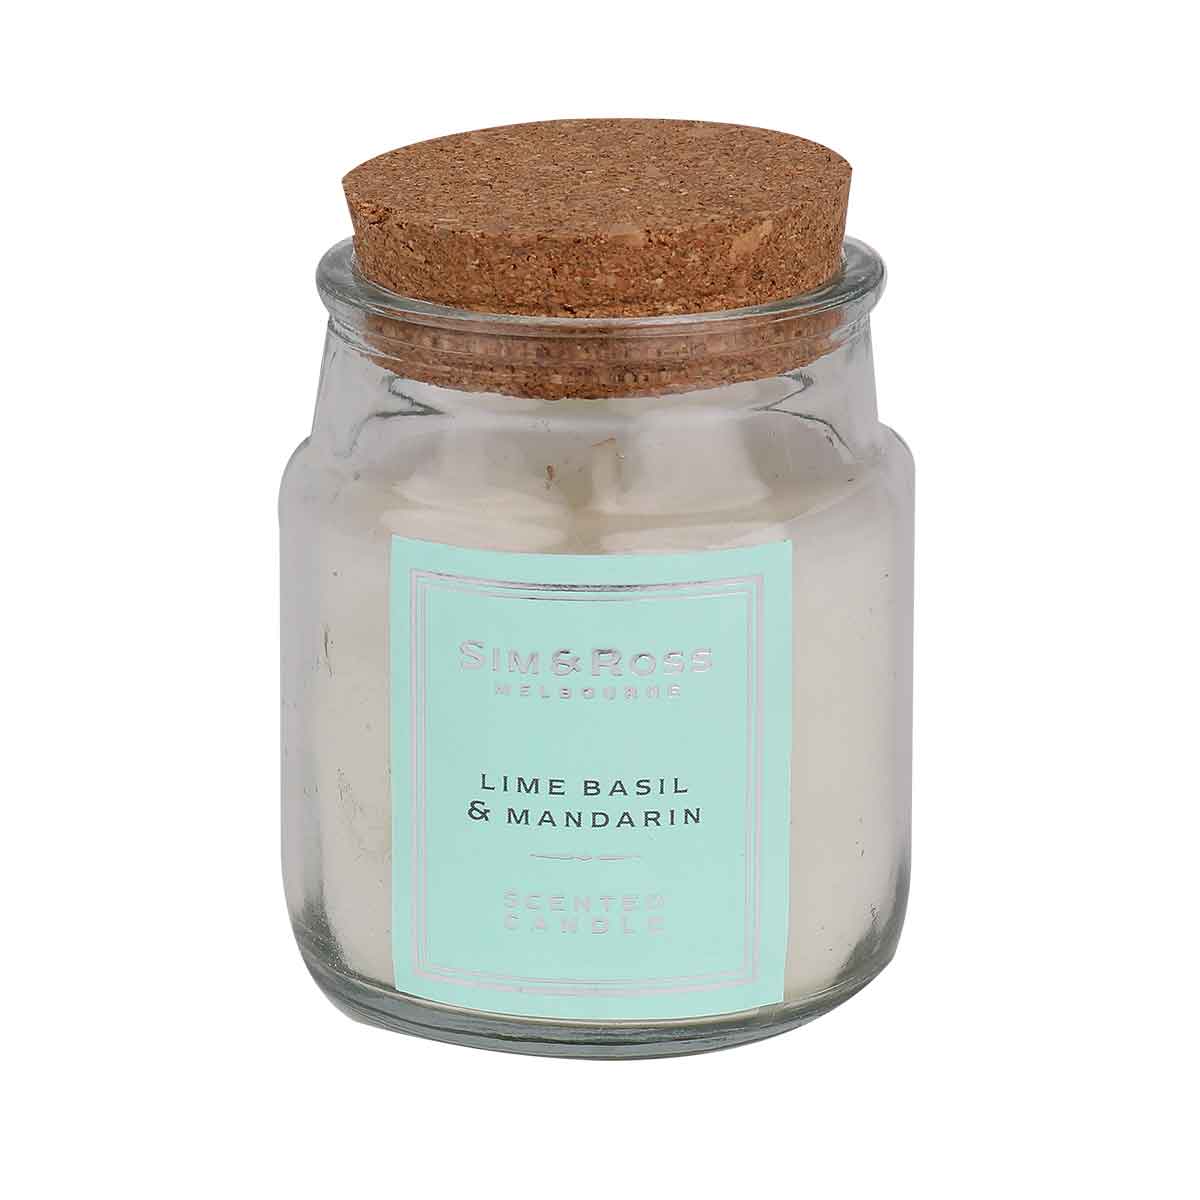 Wholesale Sim & Ross Soy Wax Scented Candle 3-Piece Set